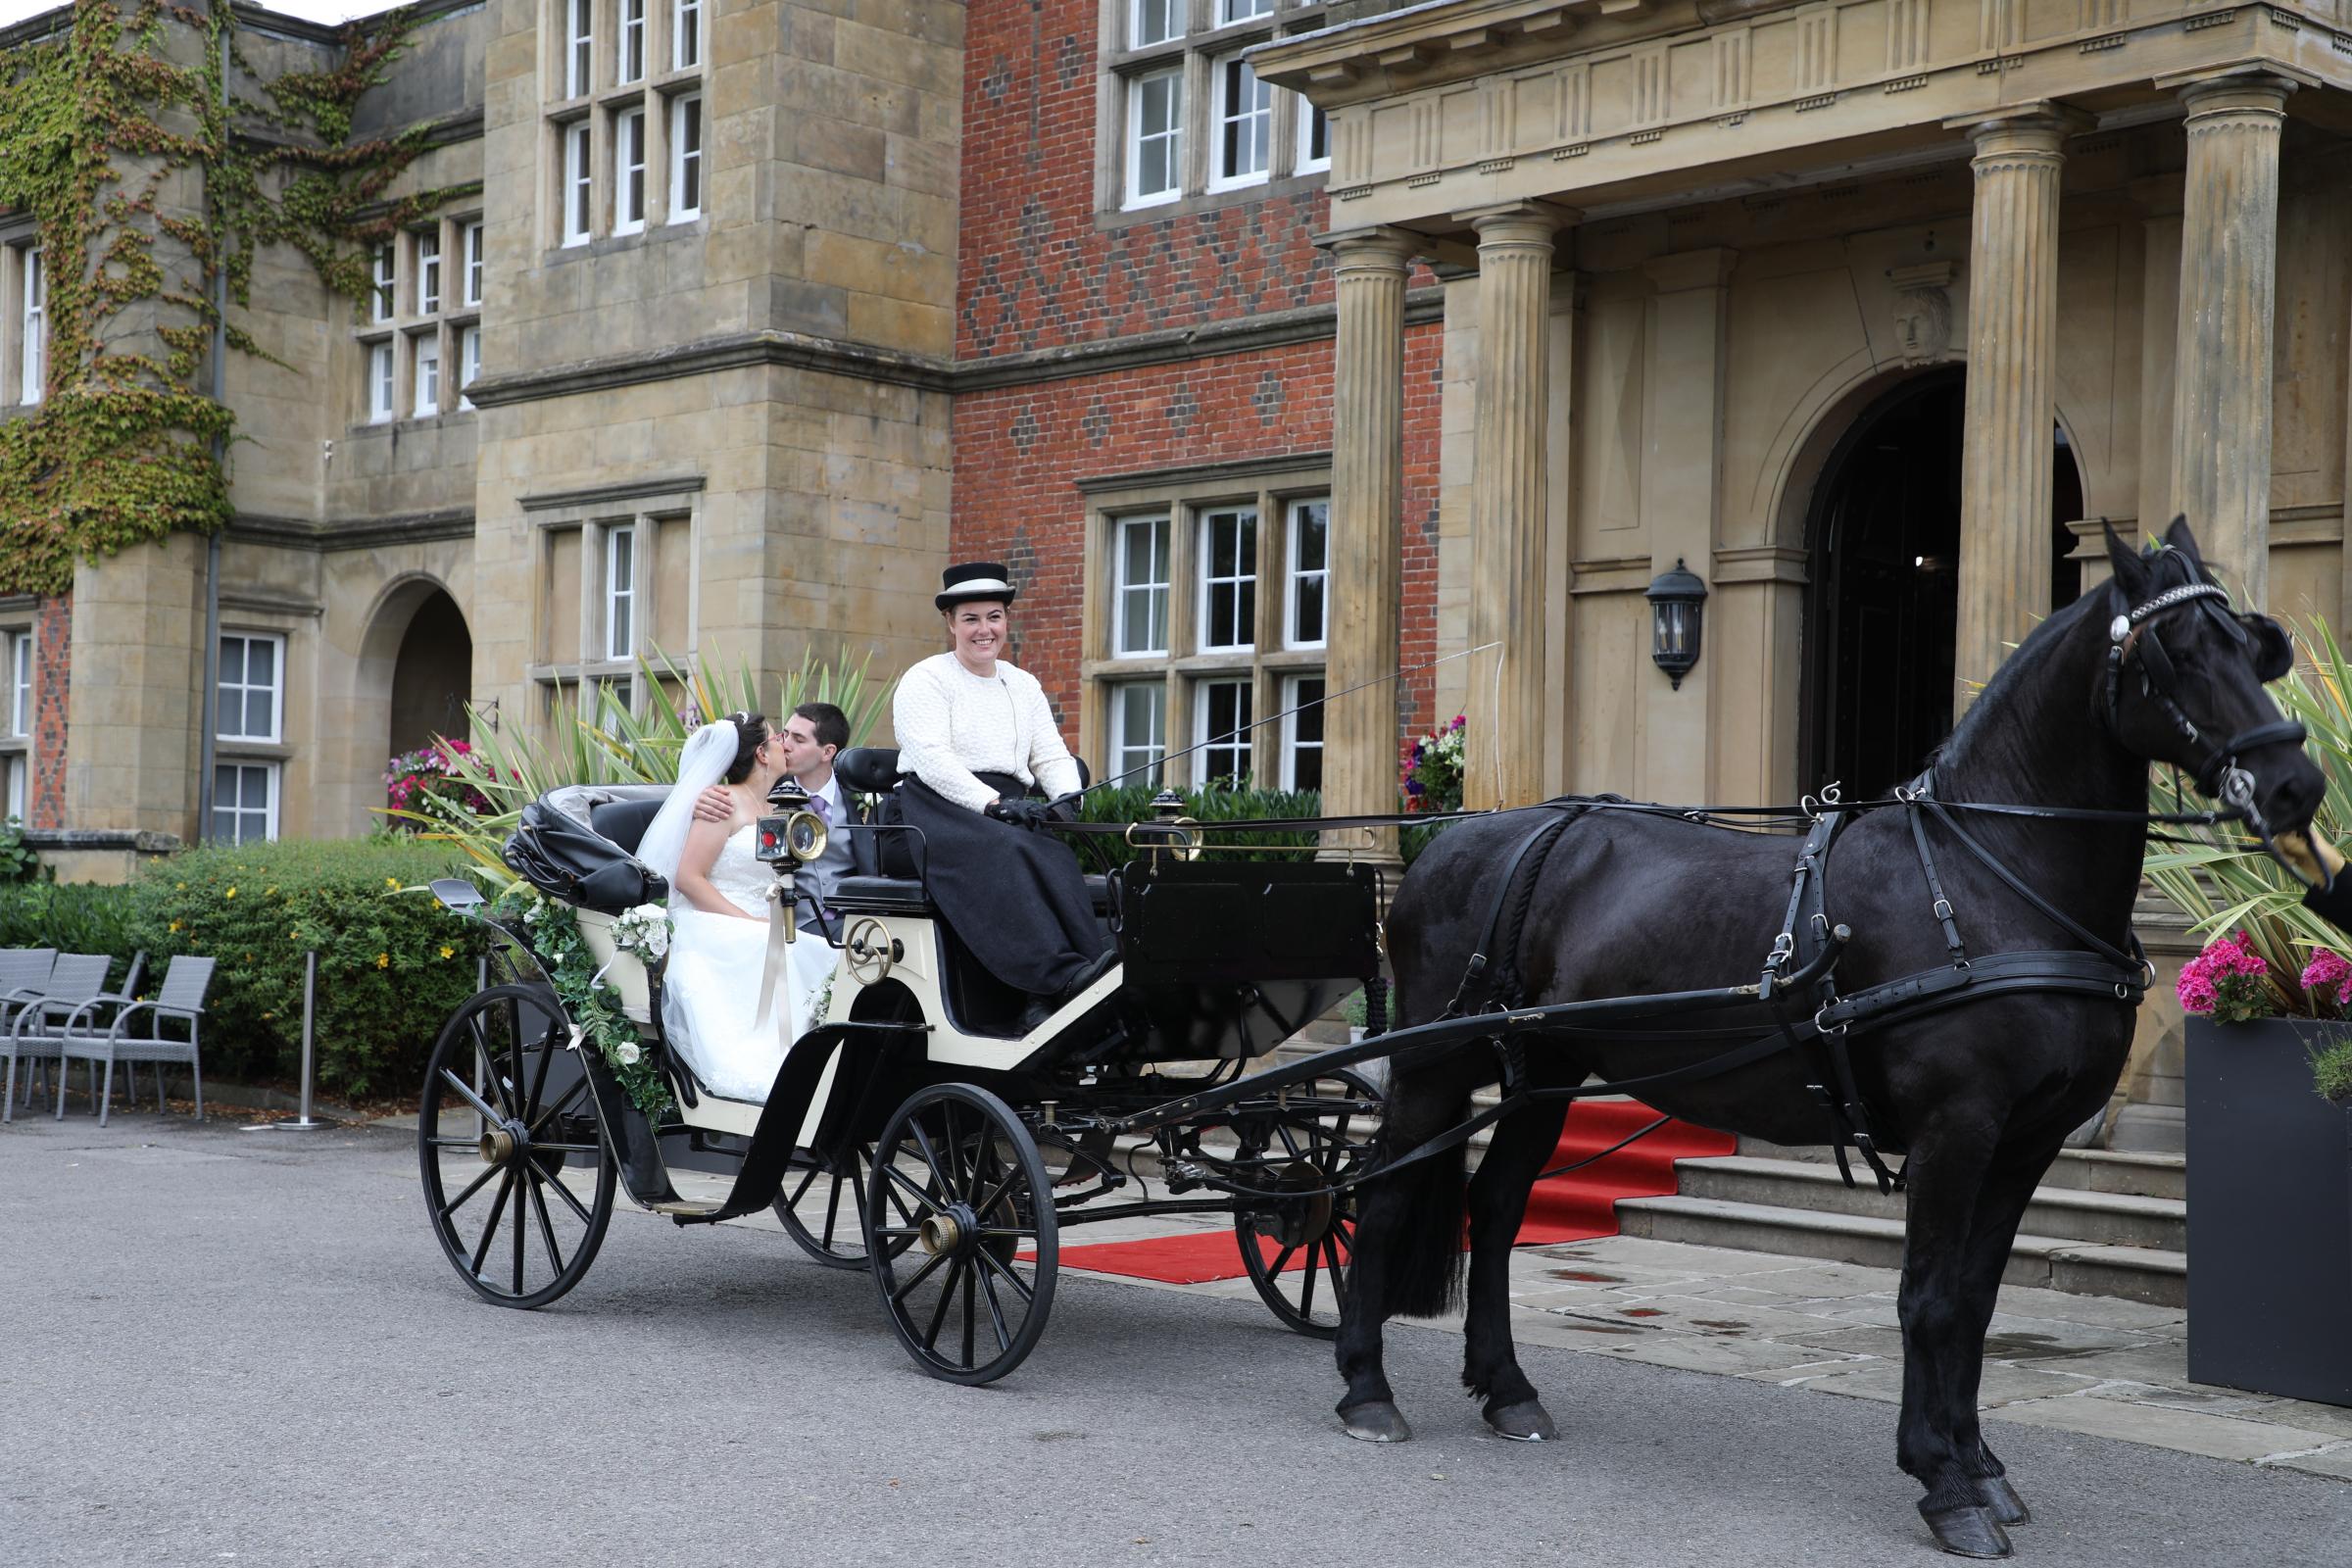 The happy couple arriving in style at Cranage Hall